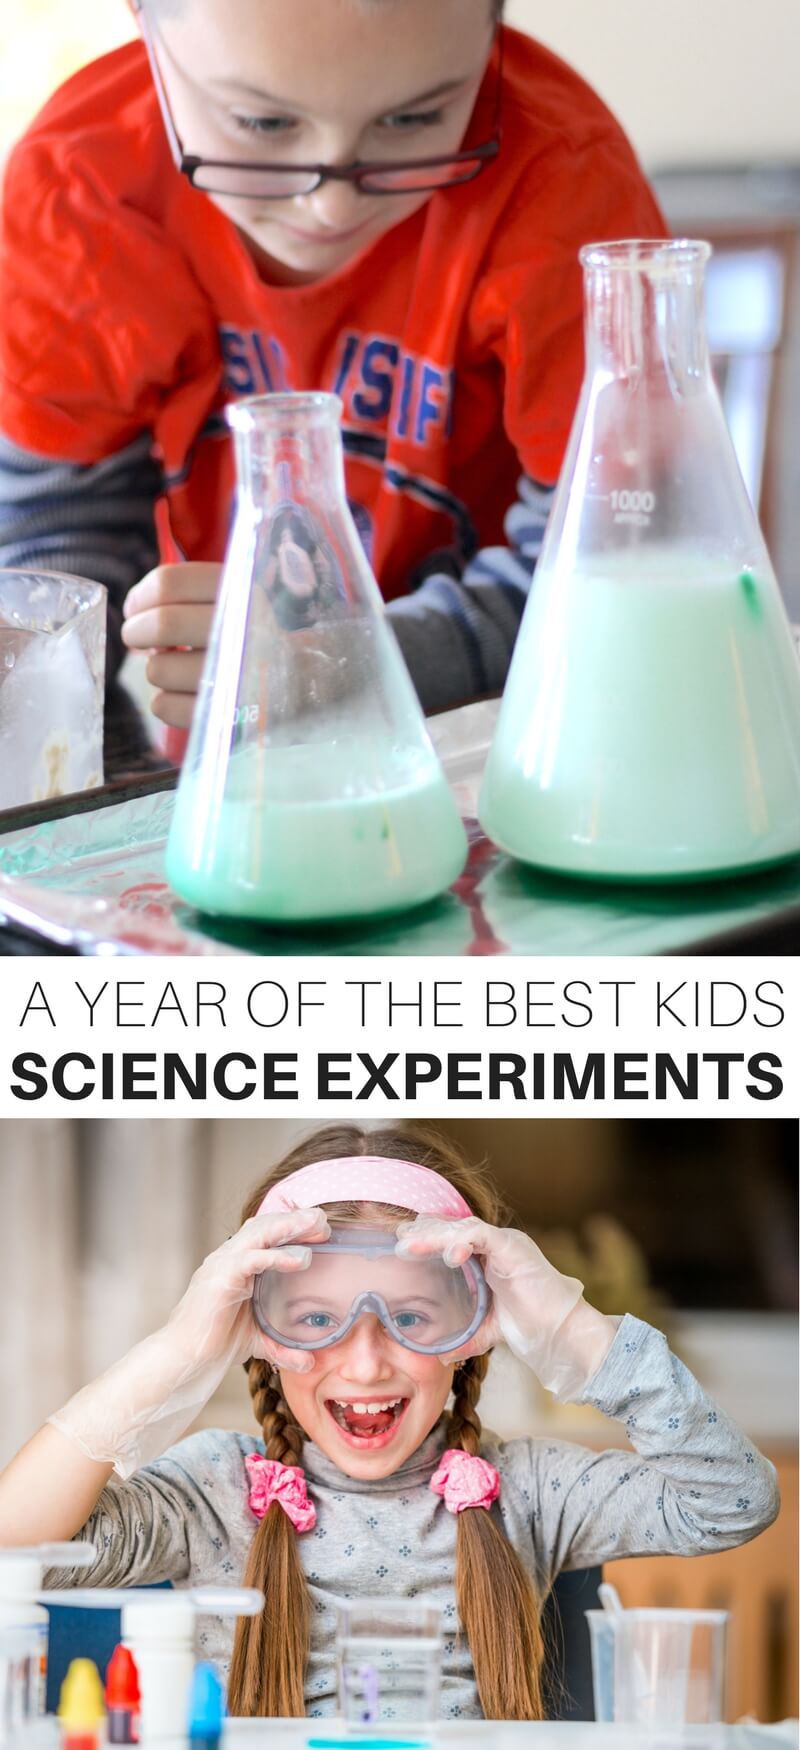 The best kids science experiments all in one spot perfect for planning your year of science. Science activities don't have to be complicated, come in a kit, or be expensive to try with kids. Our year of the best kids science experiments will provide you with fun and easy science activities for each month of the year. We enjoy seasonal and holiday themes to make science easy to learn.